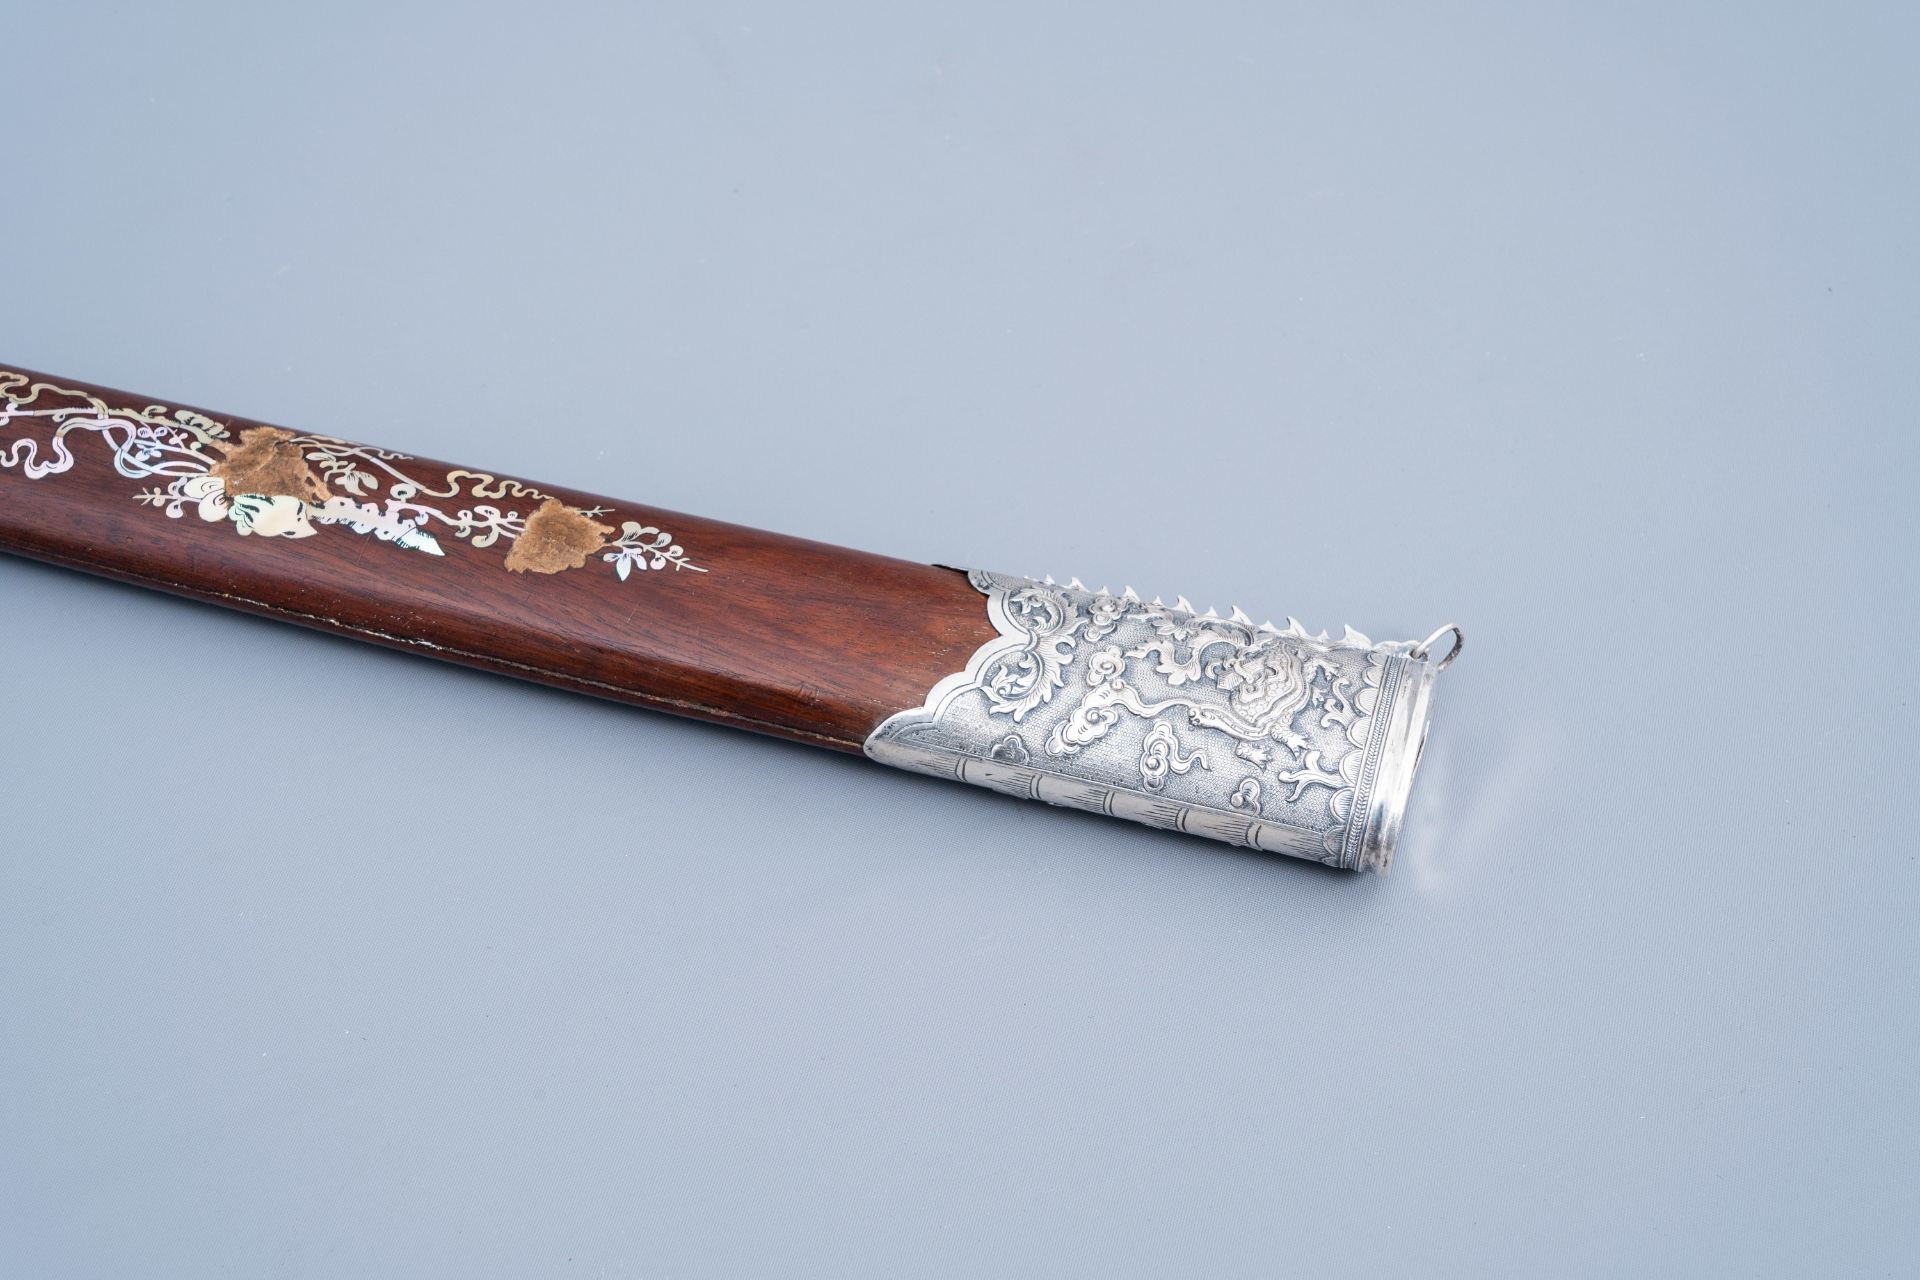 AÊ ceremonial Vietnamese 'guom' sword with silver and mother-of-pearl inlaid wooden scabbard with dr - Image 9 of 13